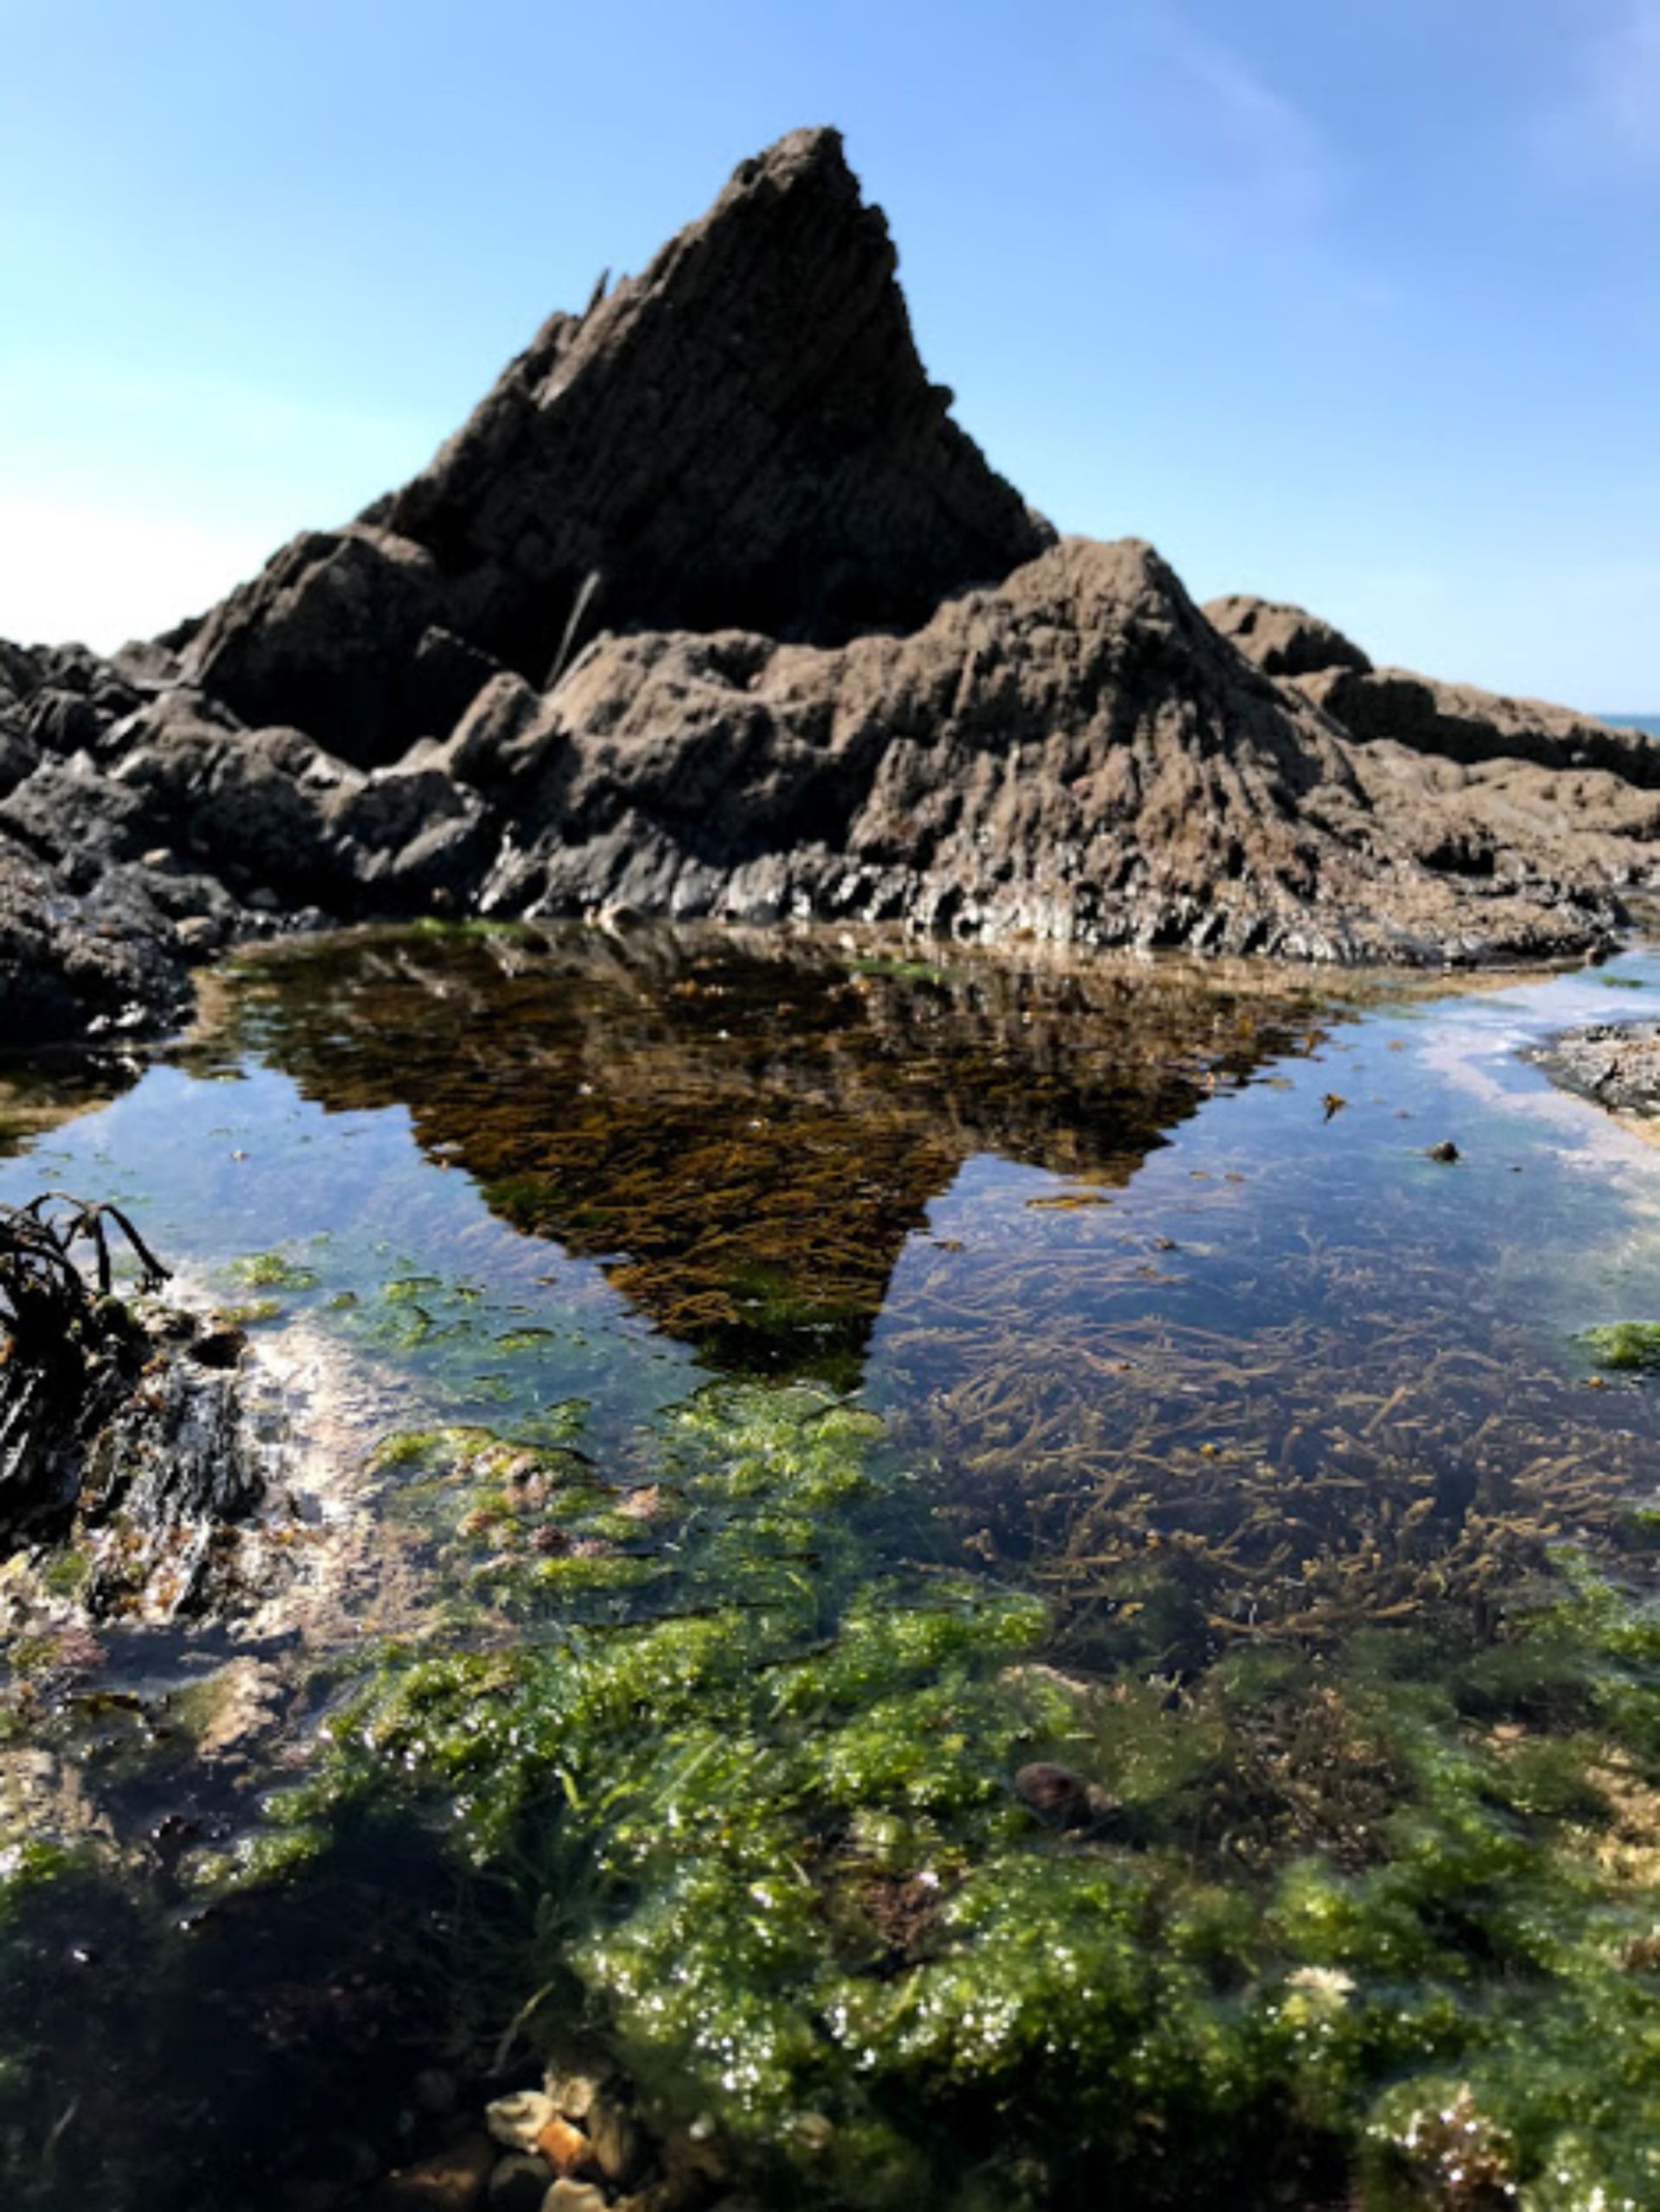 The rock pools around Westward Ho! are beautiful and full of life